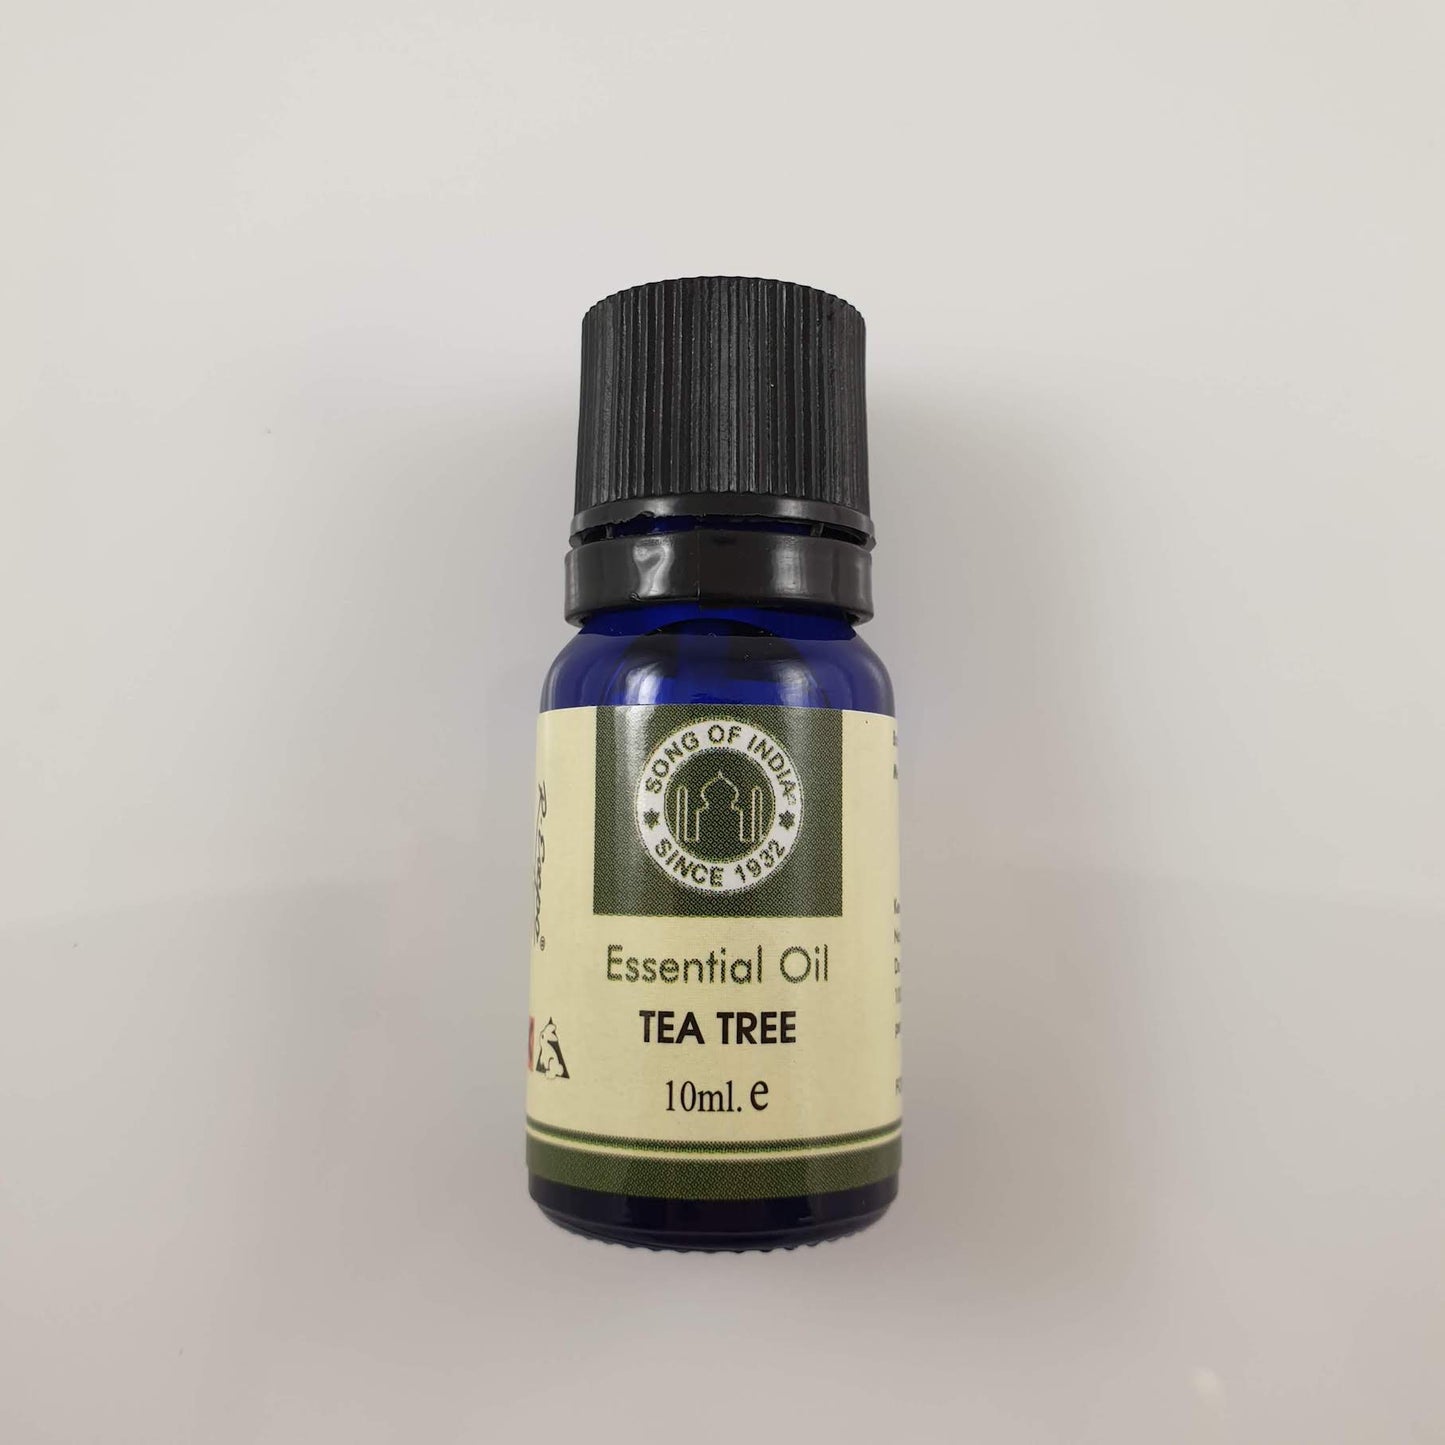 Song of India Essential Oil - Tea Tree 10ml - Rivendell Shop